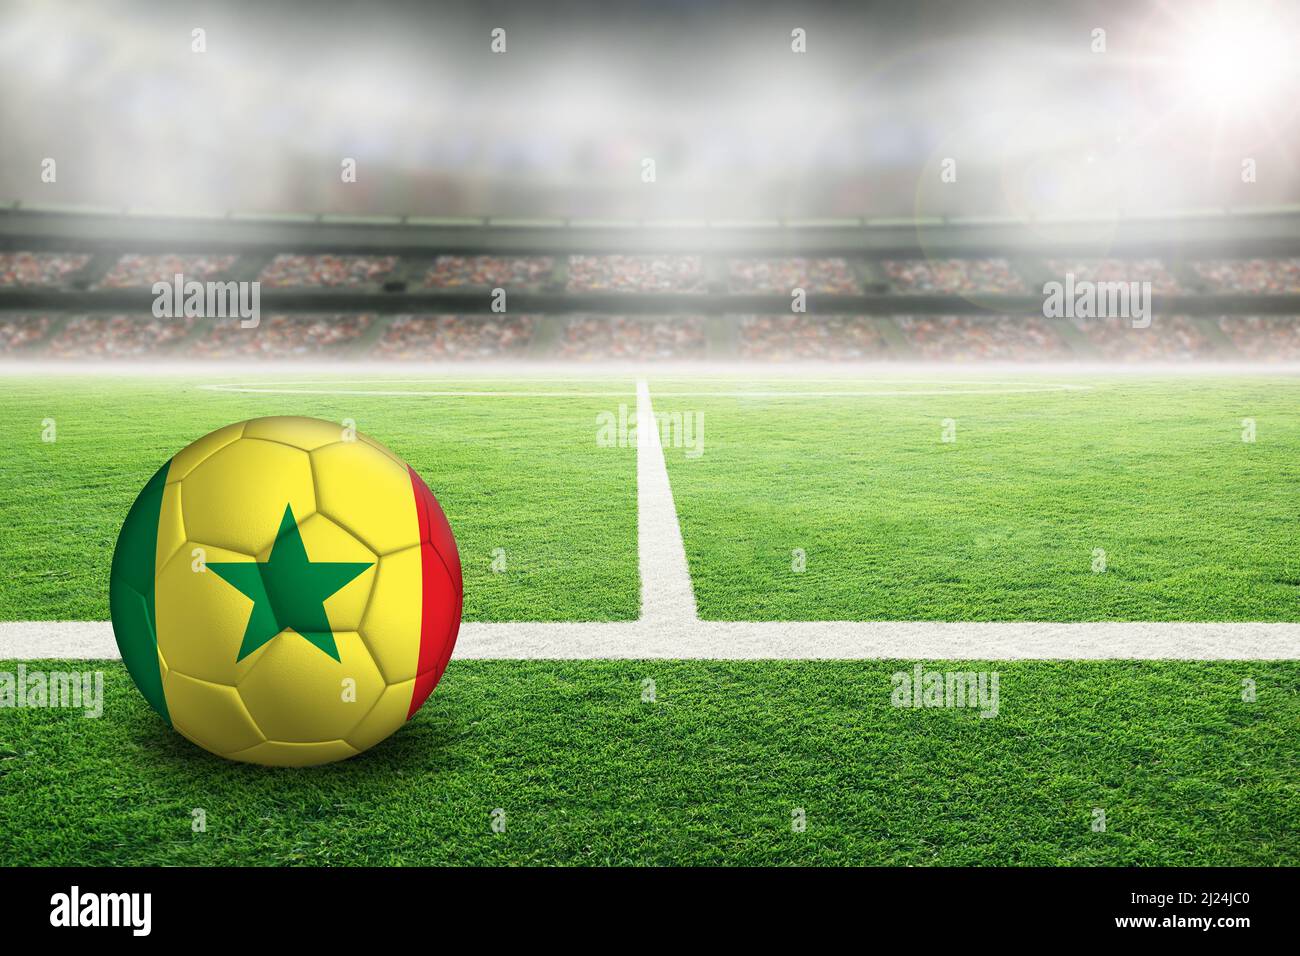 Football in brightly lit outdoor stadium with painted flag of Senegal. Focus on foreground and soccer ball with shallow depth of field on background a Stock Photo